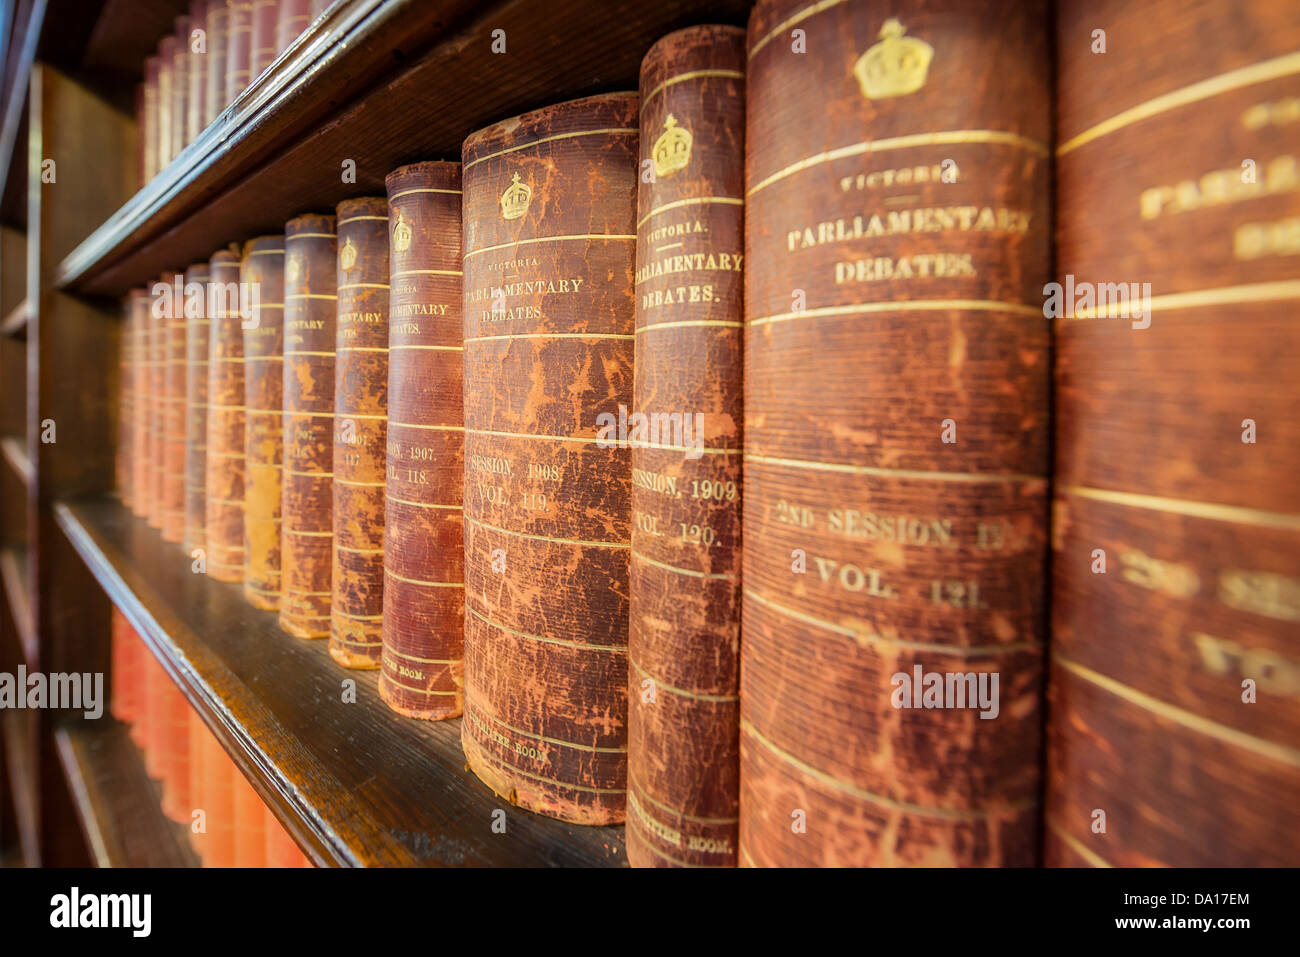 Some heavy reading among books on the shelves of the Parliament of Victoria in Australia. Stock Photo